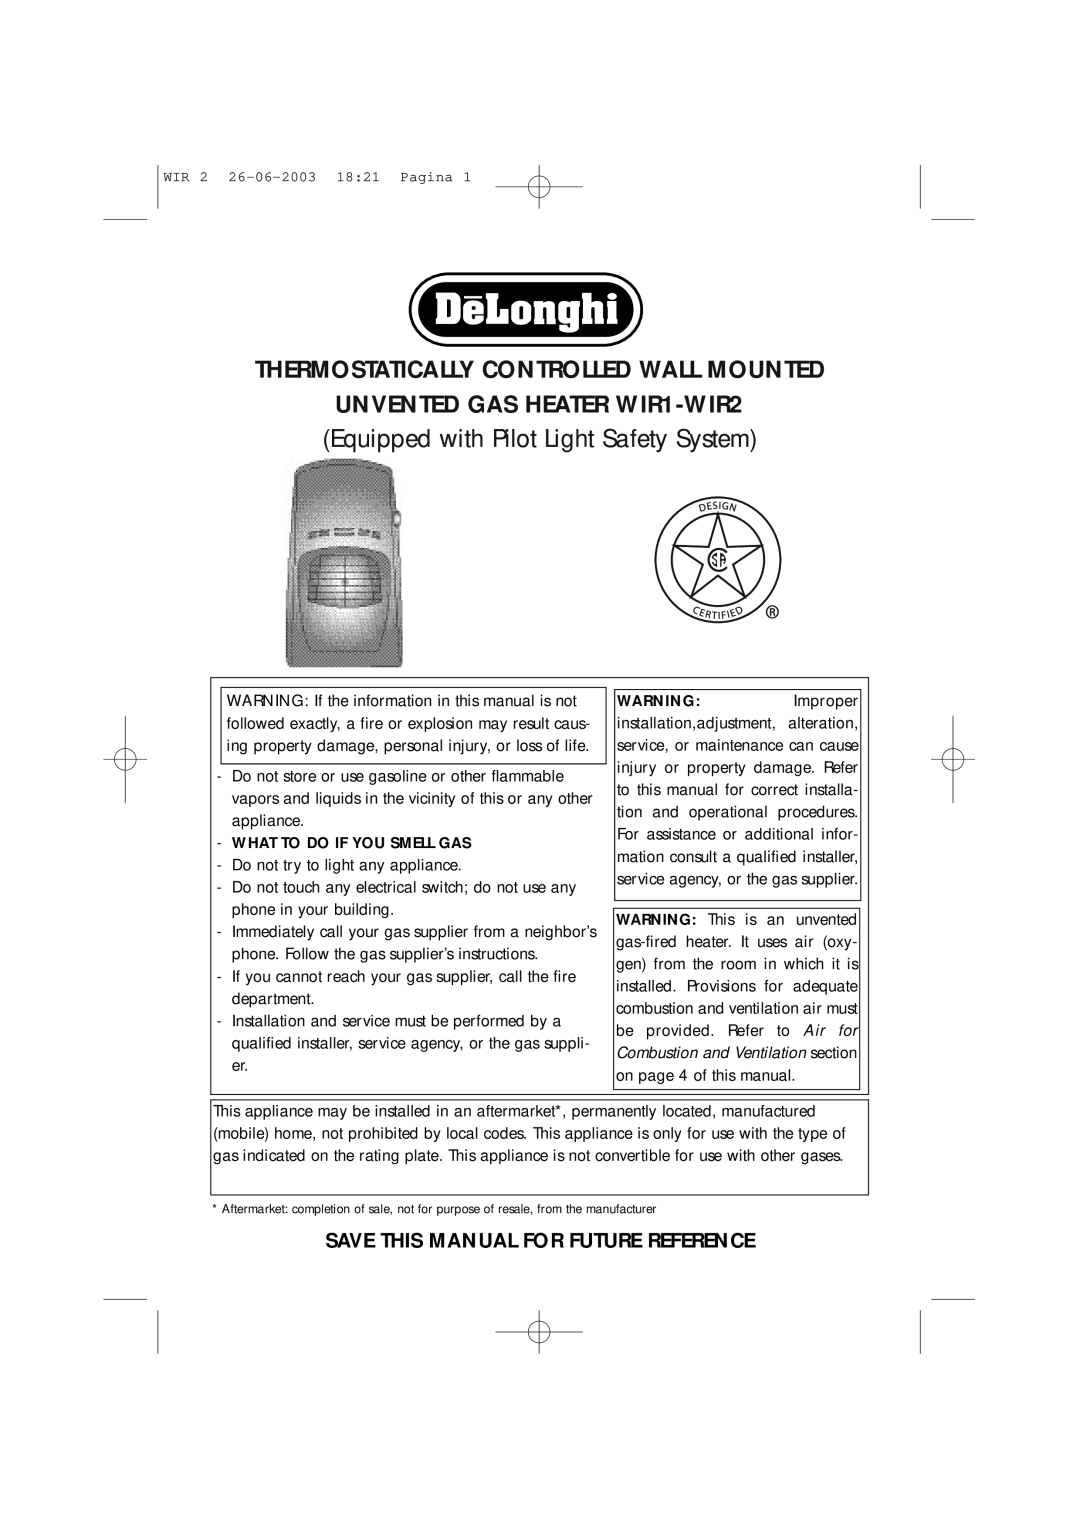 DeLonghi WIR2, WIR1 manual Thermostatically Controlled Wall Mounted, Save This Manual For Future Reference 